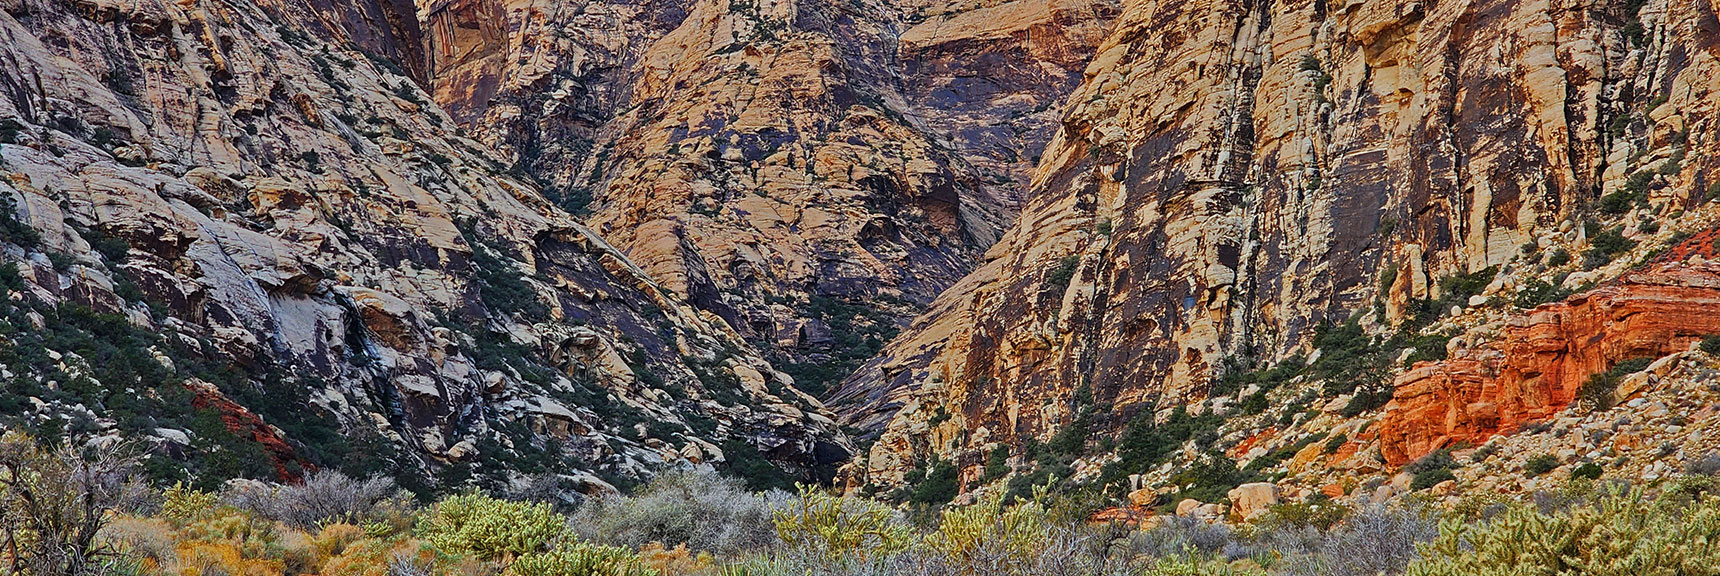 The Canyon Quickly Narrows, Will Soon Need to Descend into Brush and Boulders | Oak Creek Canyon North Branch Toward Rainbow Mountains Upper Crest Ridgeline | Rainbow Mountain Wilderness, Nevada